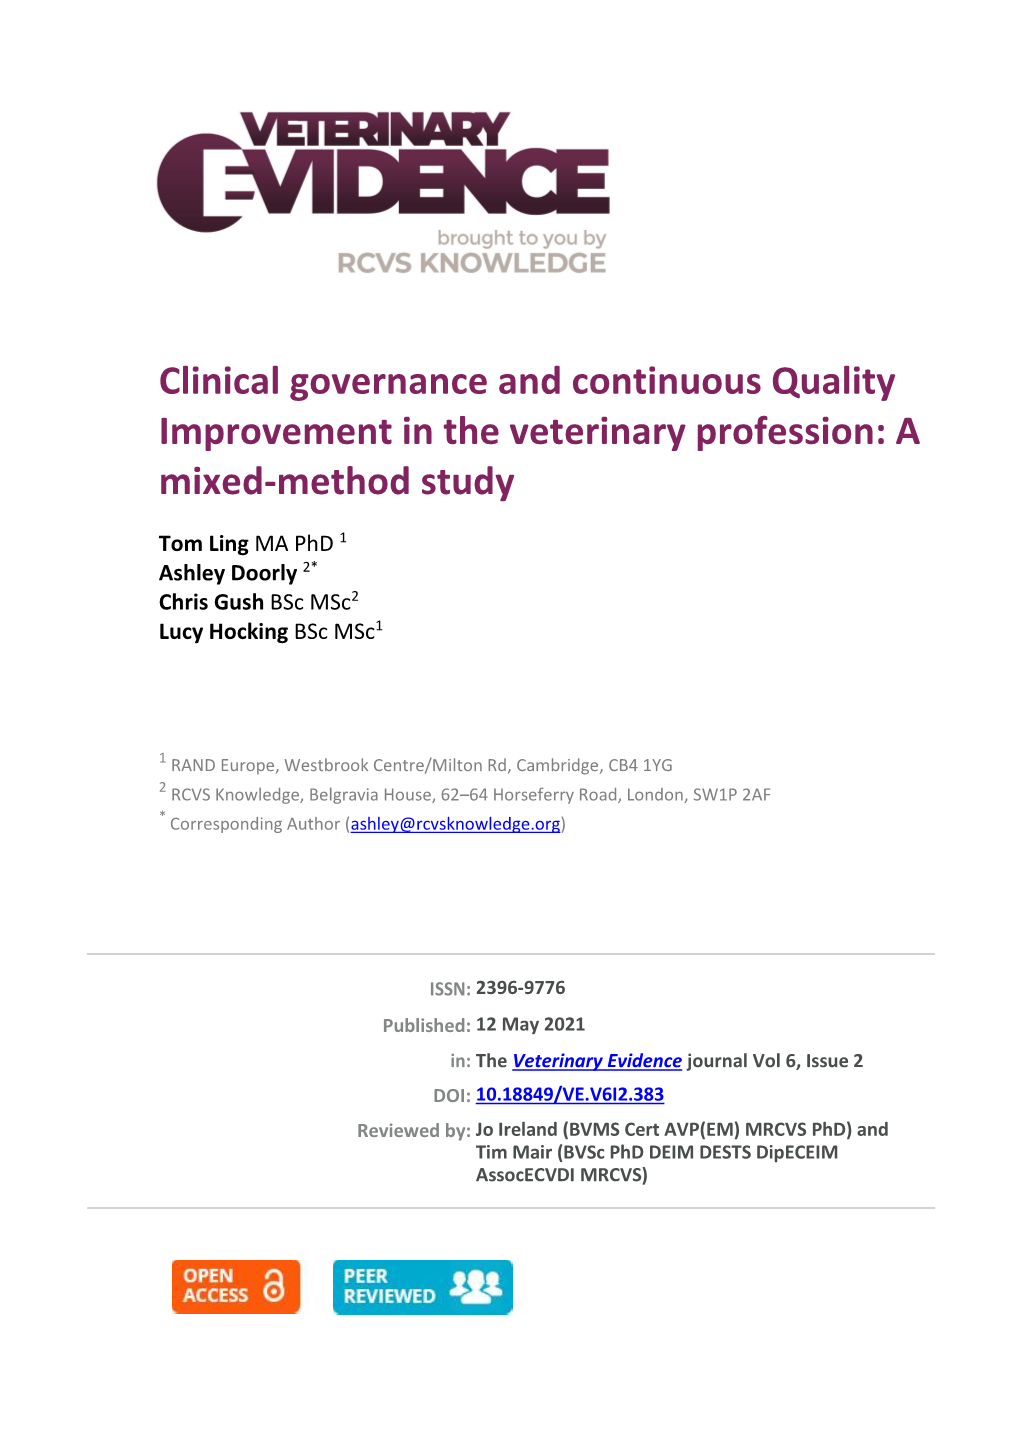 Clinical Governance and Continuous Quality Improvement in the Veterinary Profession: a Mixed-Method Study